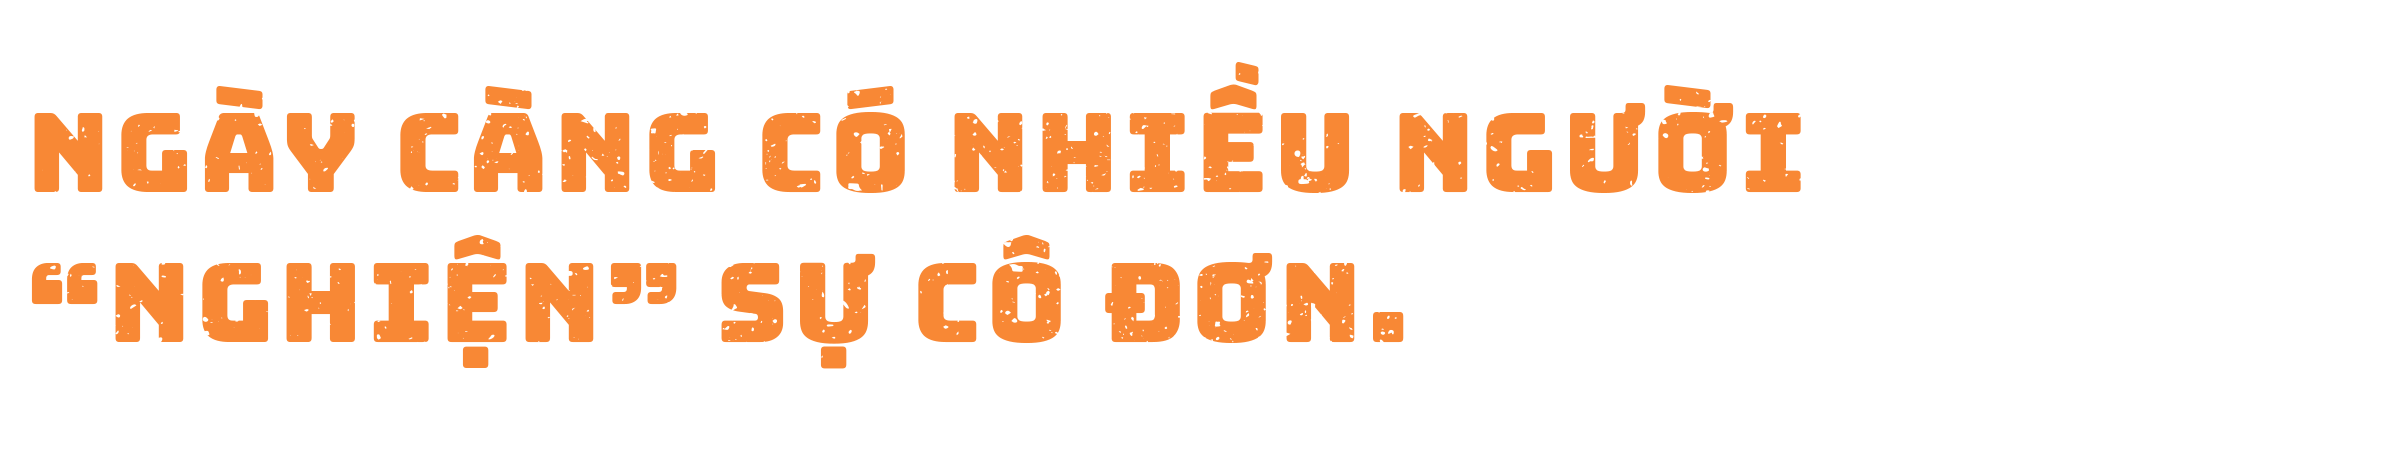 nghien-co-don-song-doc-than